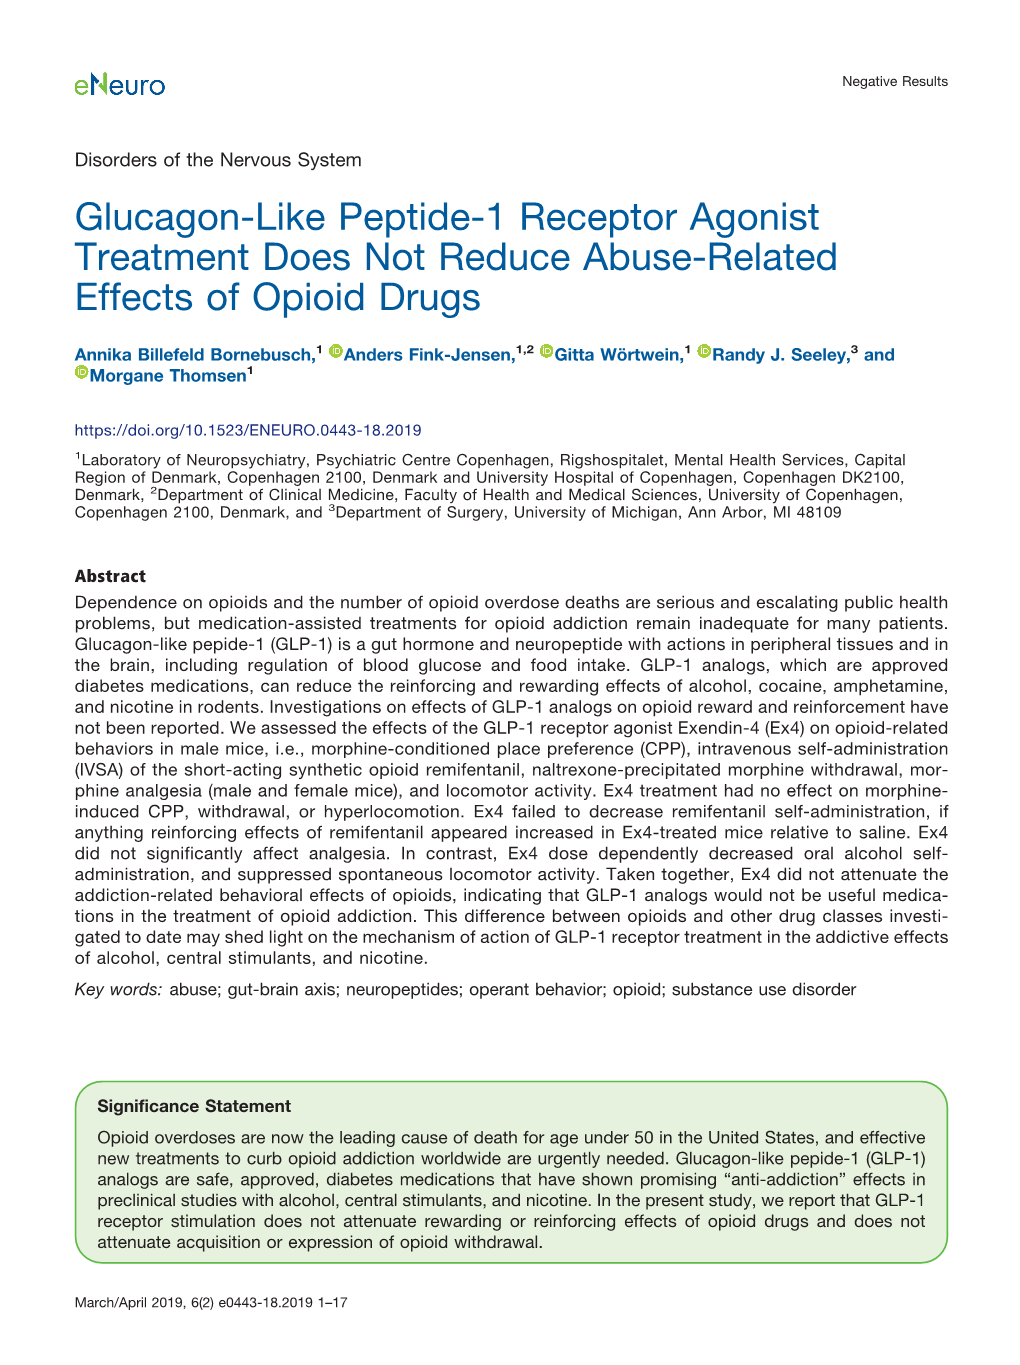 Glucagon-Like Peptide-1 Receptor Agonist Treatment Does Not Reduce Abuse-Related Effects of Opioid Drugs